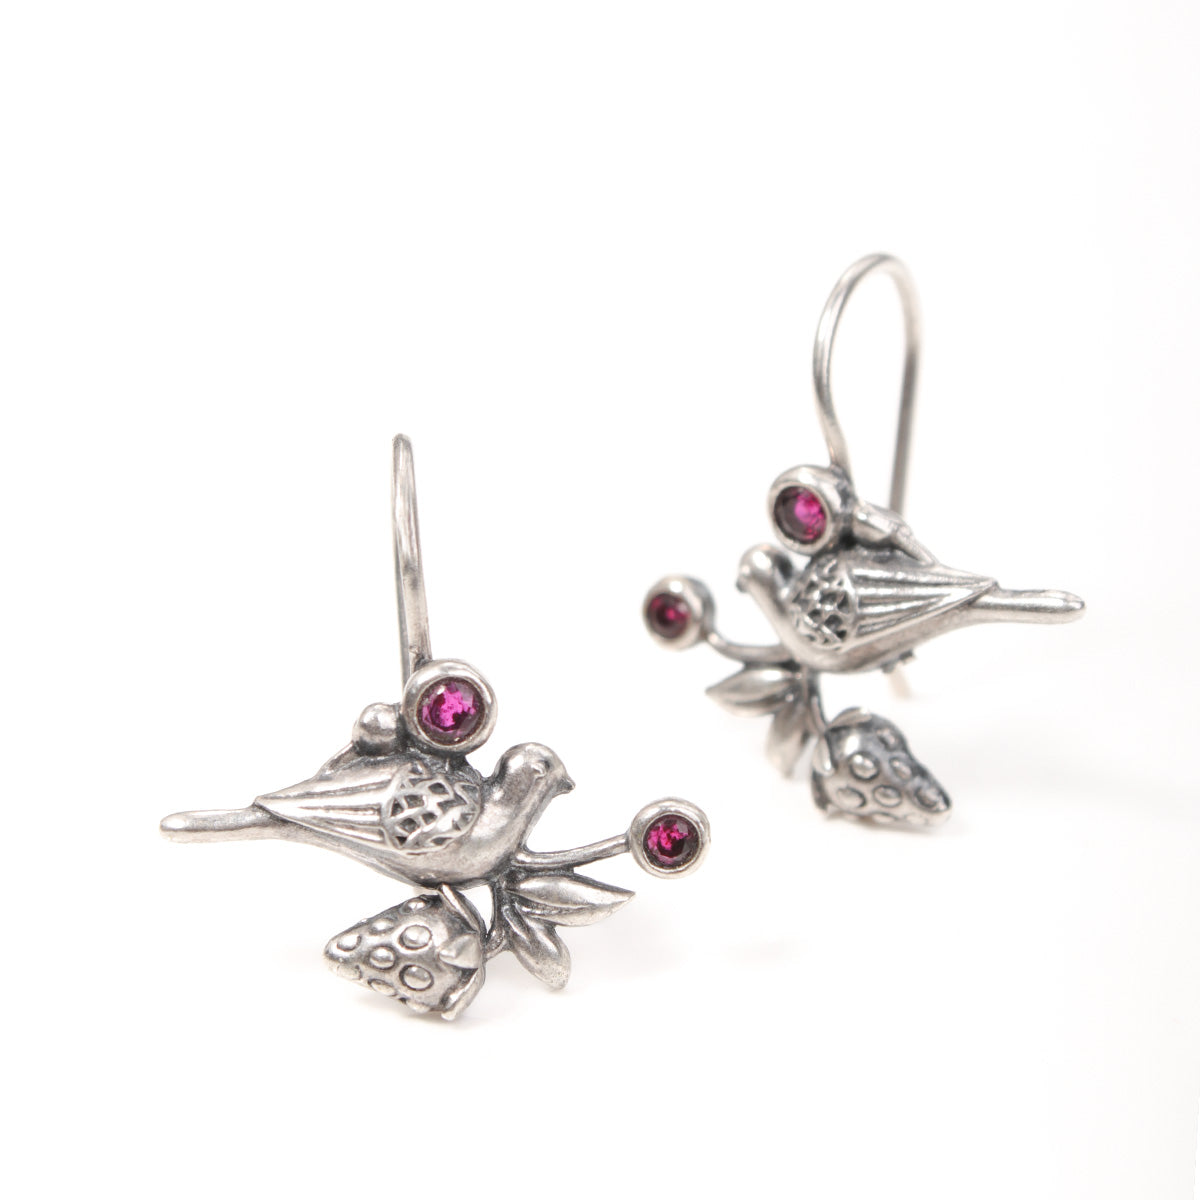 William Morris - Strawberry Thief Silver Dangling Earring by Moha